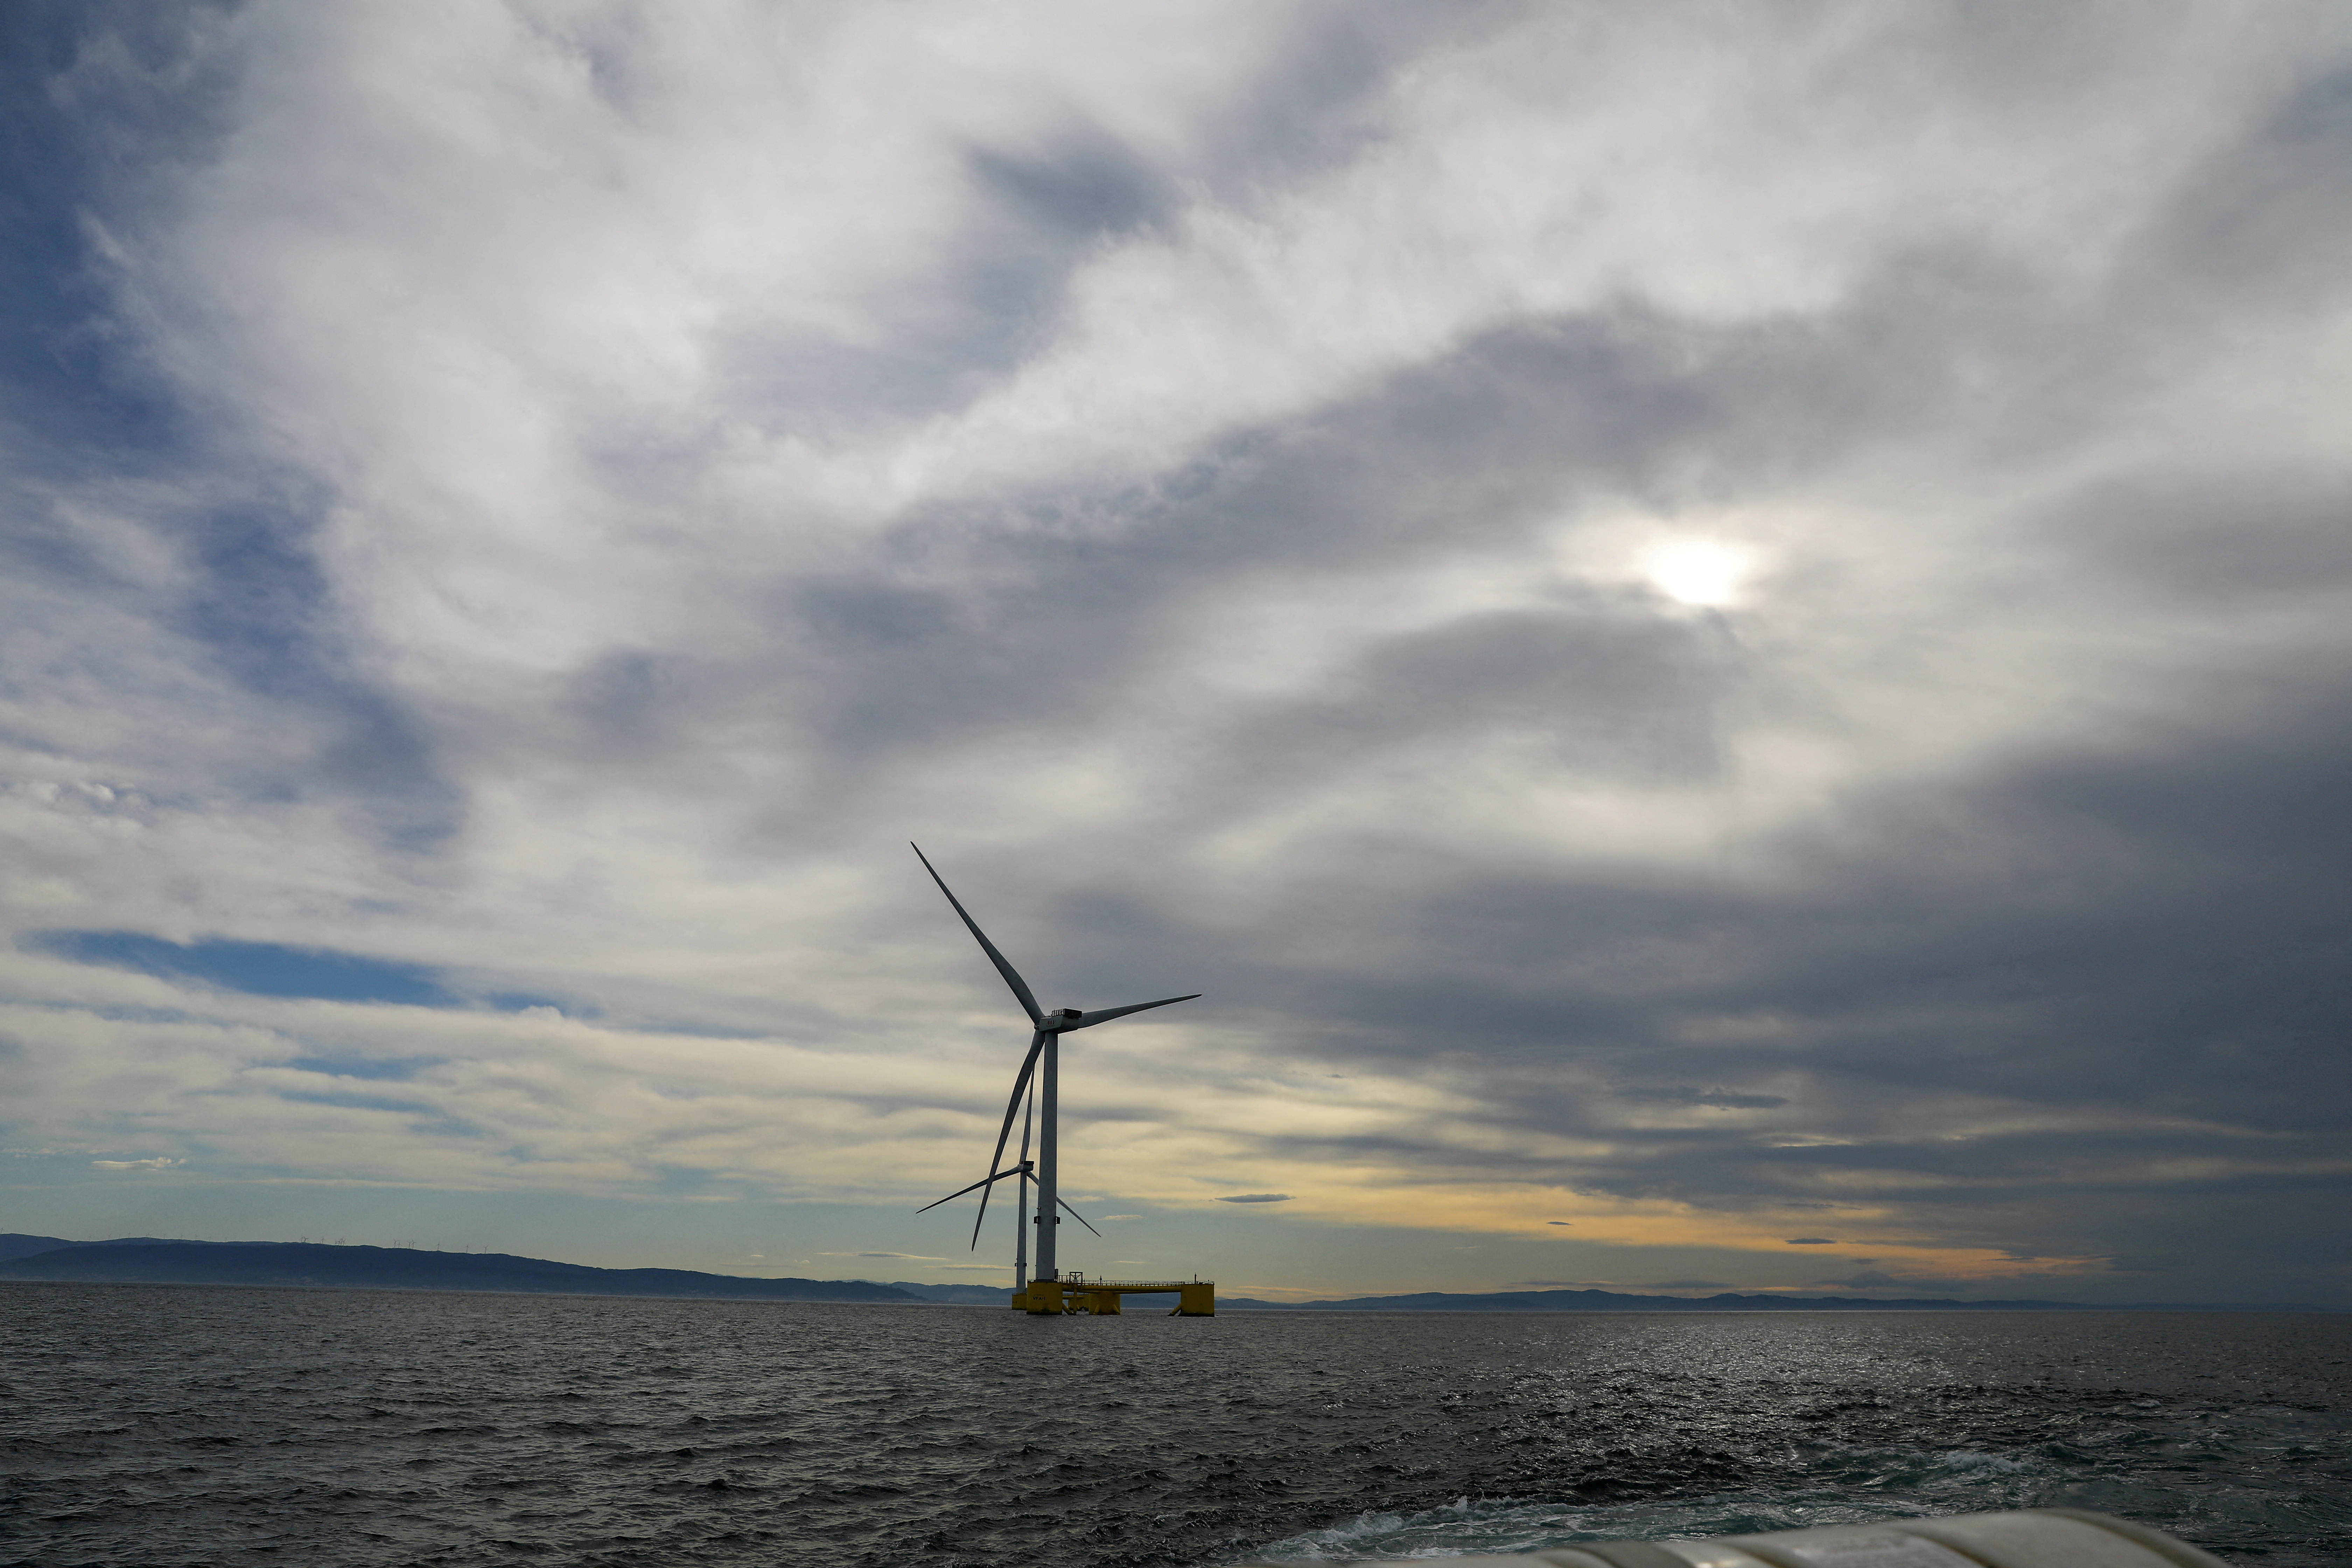 Explainer: Why the offshore wind power industry has hit turbulence